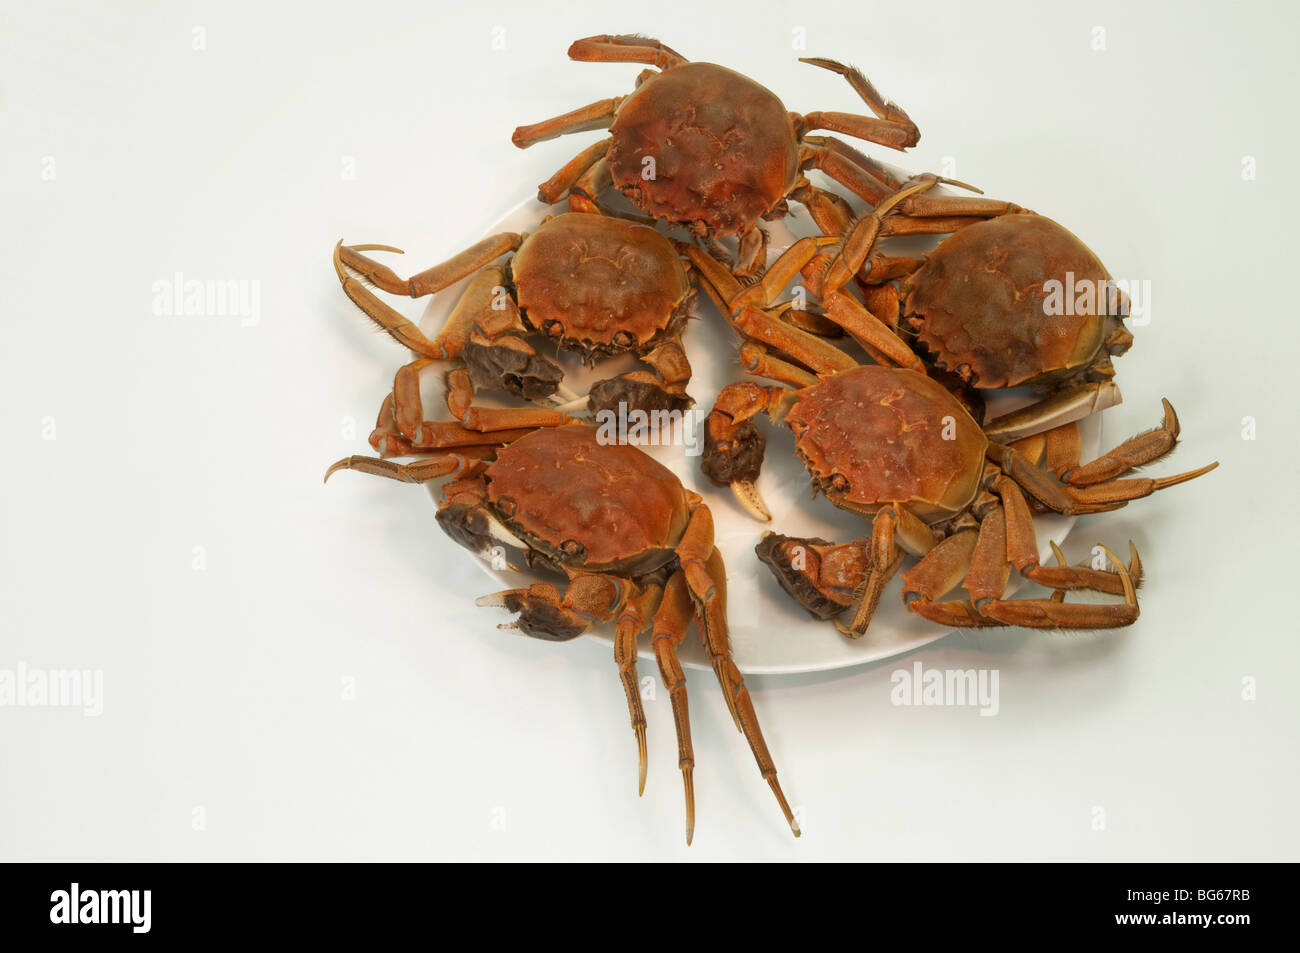 Chinese Mitten Crab (Eriocheir sinensis), cooked specimens. The crabs are a famous delicacy in Shanghai cuisine. Stock Photo